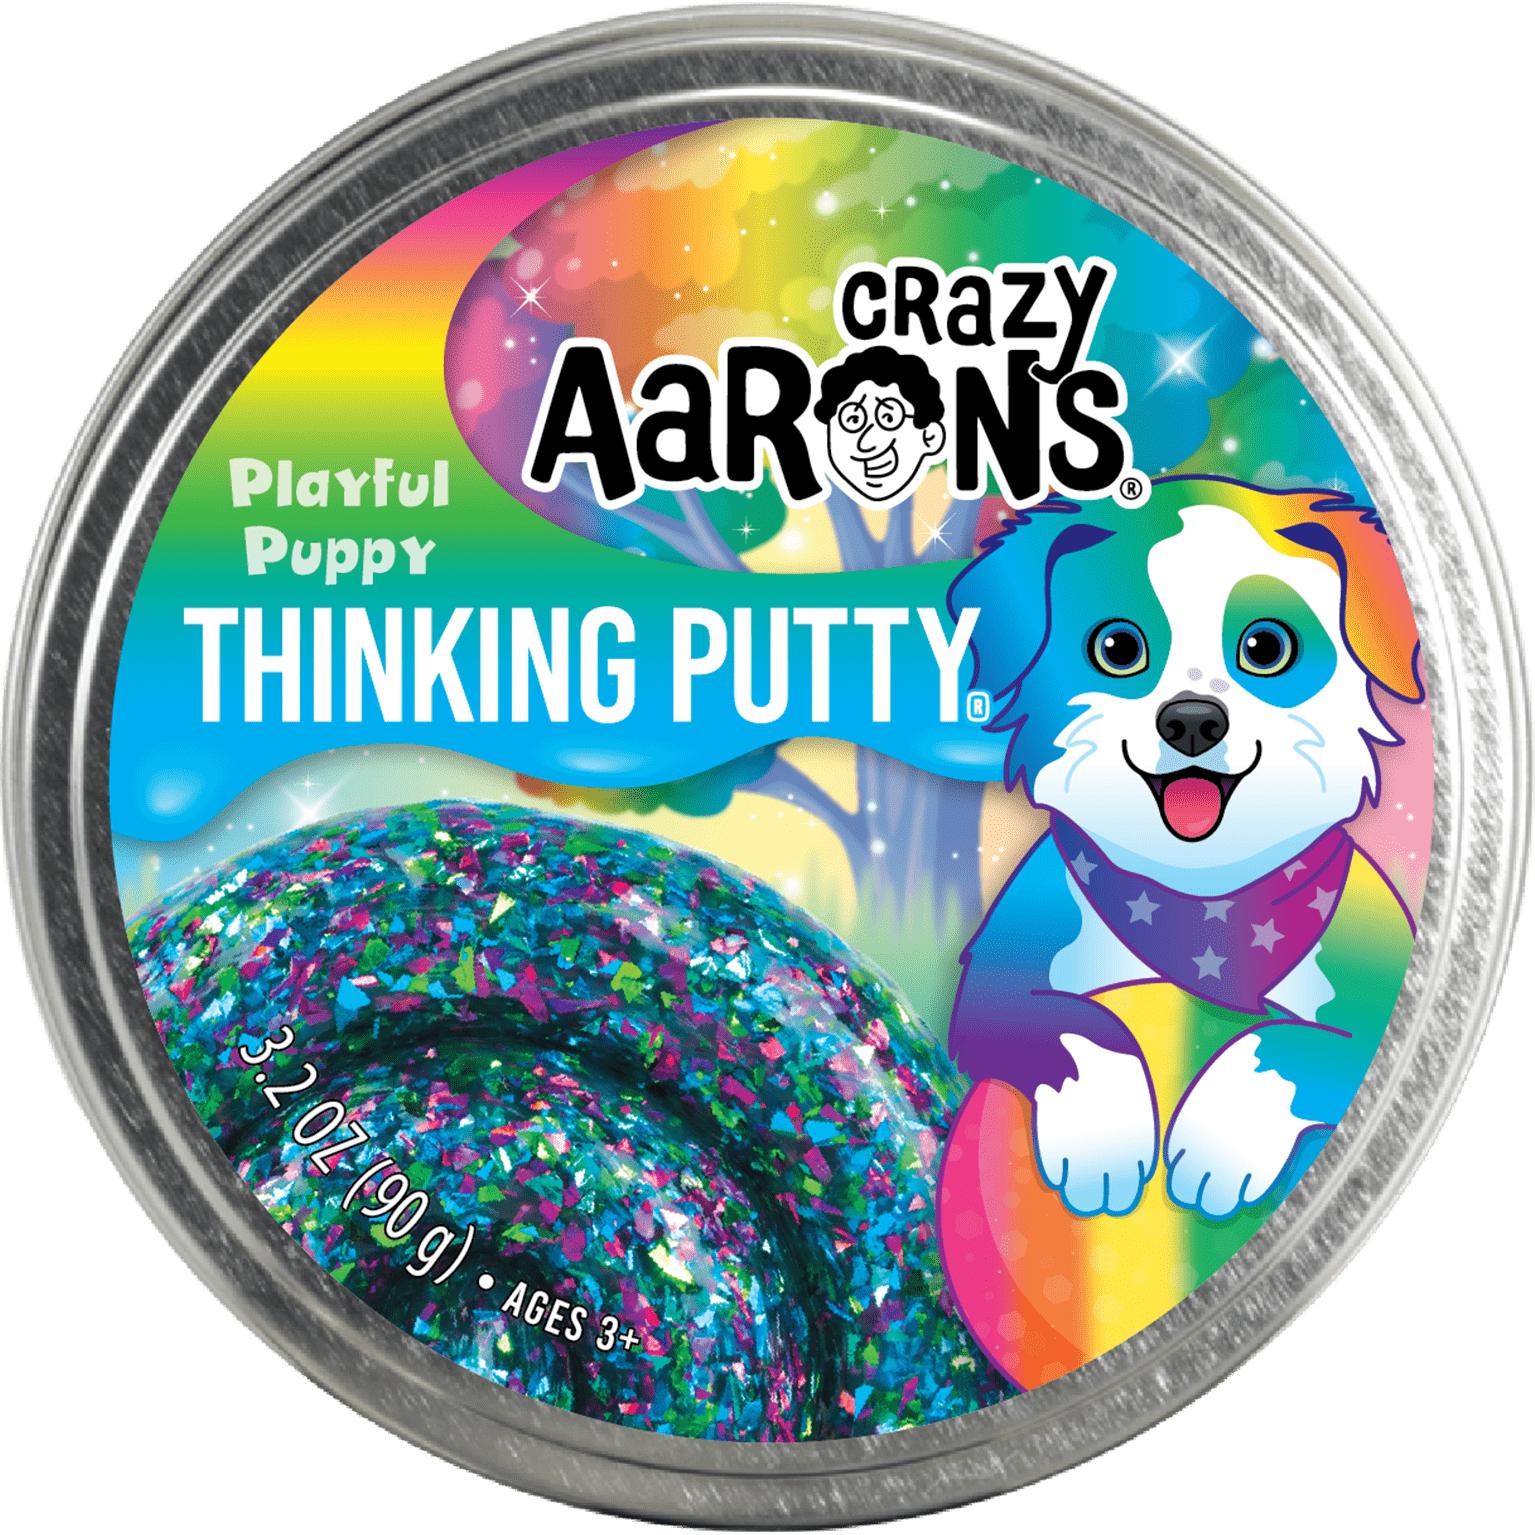 Crazy Aaron's Playful Puppy | Putty Pets